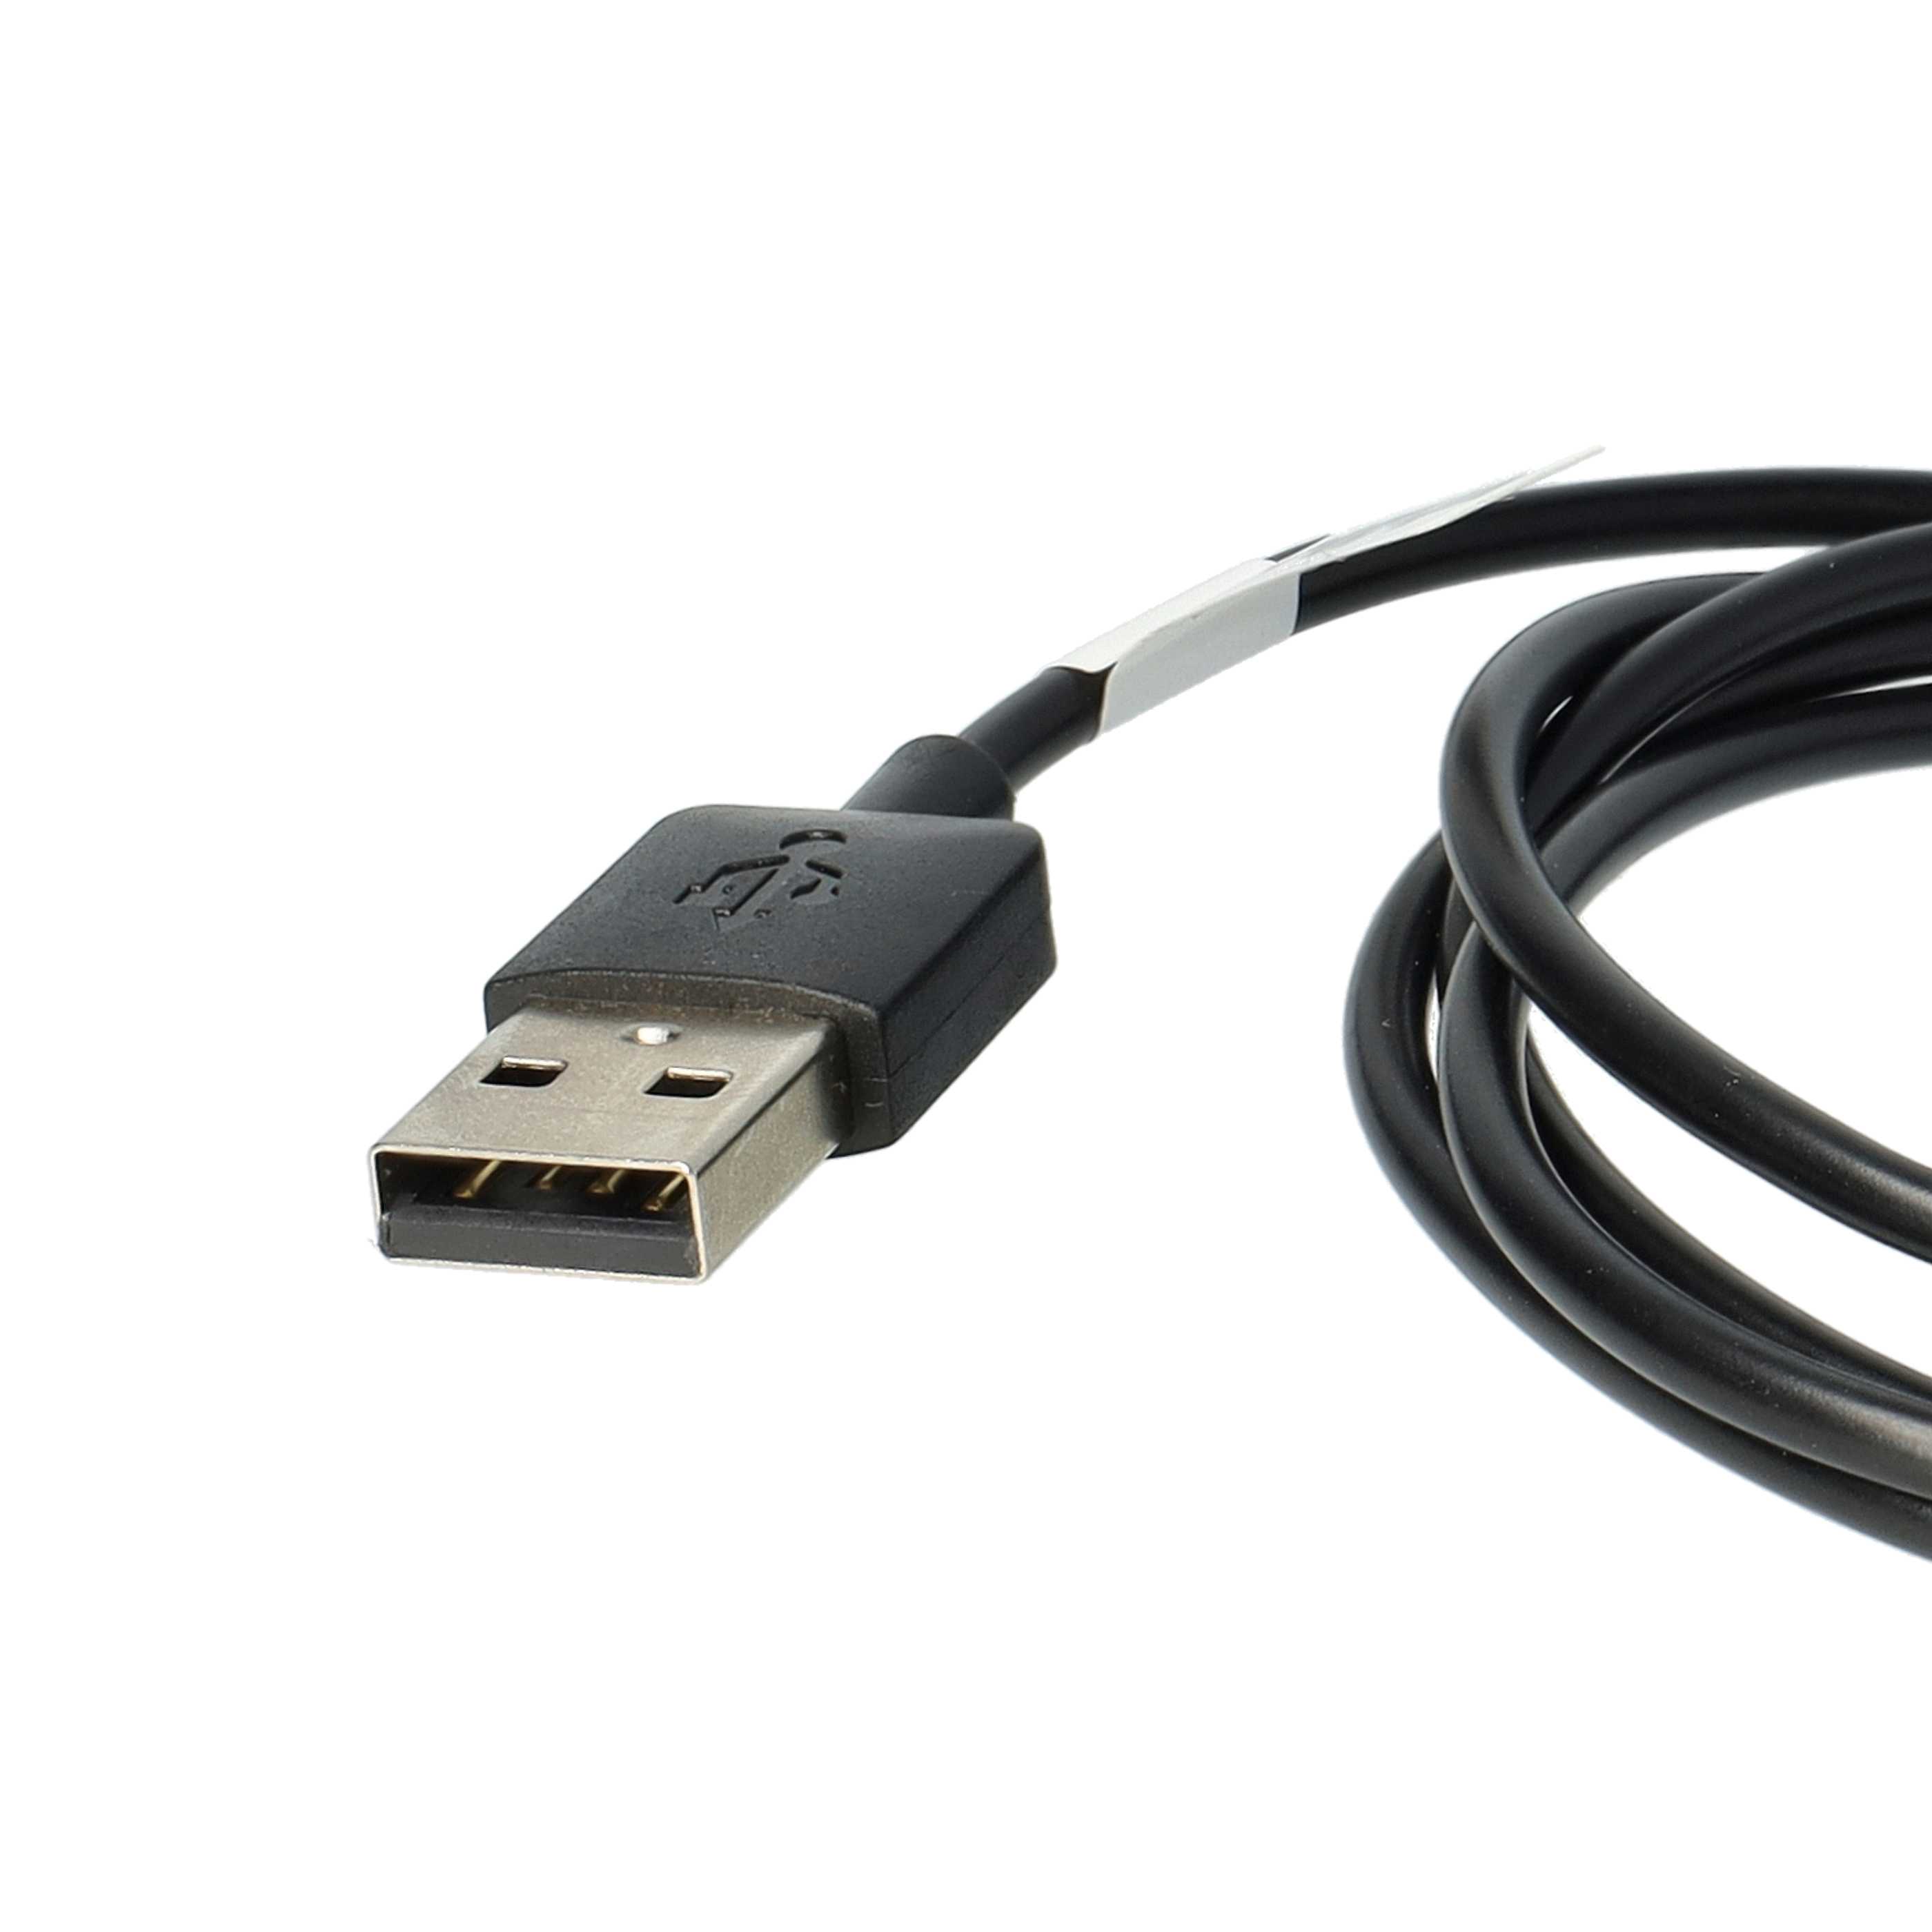 Charging Cable replaces Garmin 8013048 for Garmin Fitness Tracker - USB A Cable, 100cm, black